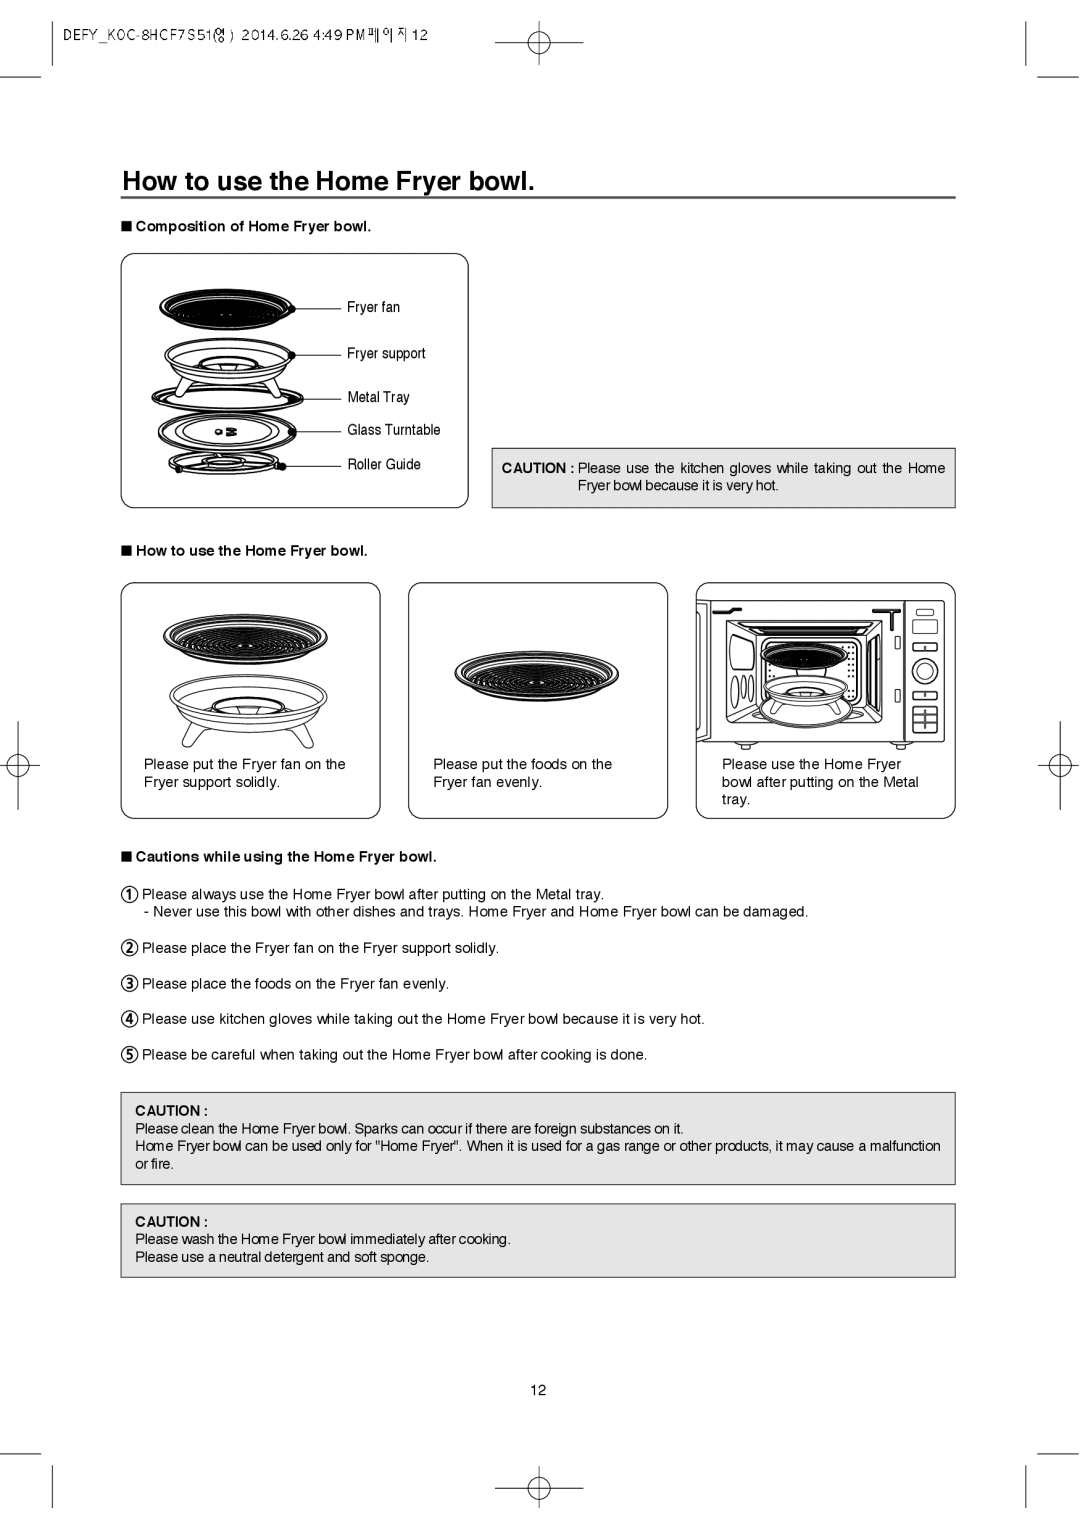 Defy Appliances MWA 2434 MM user manual How to use the Home Fryer bowl, Composition of Home Fryer bowl 